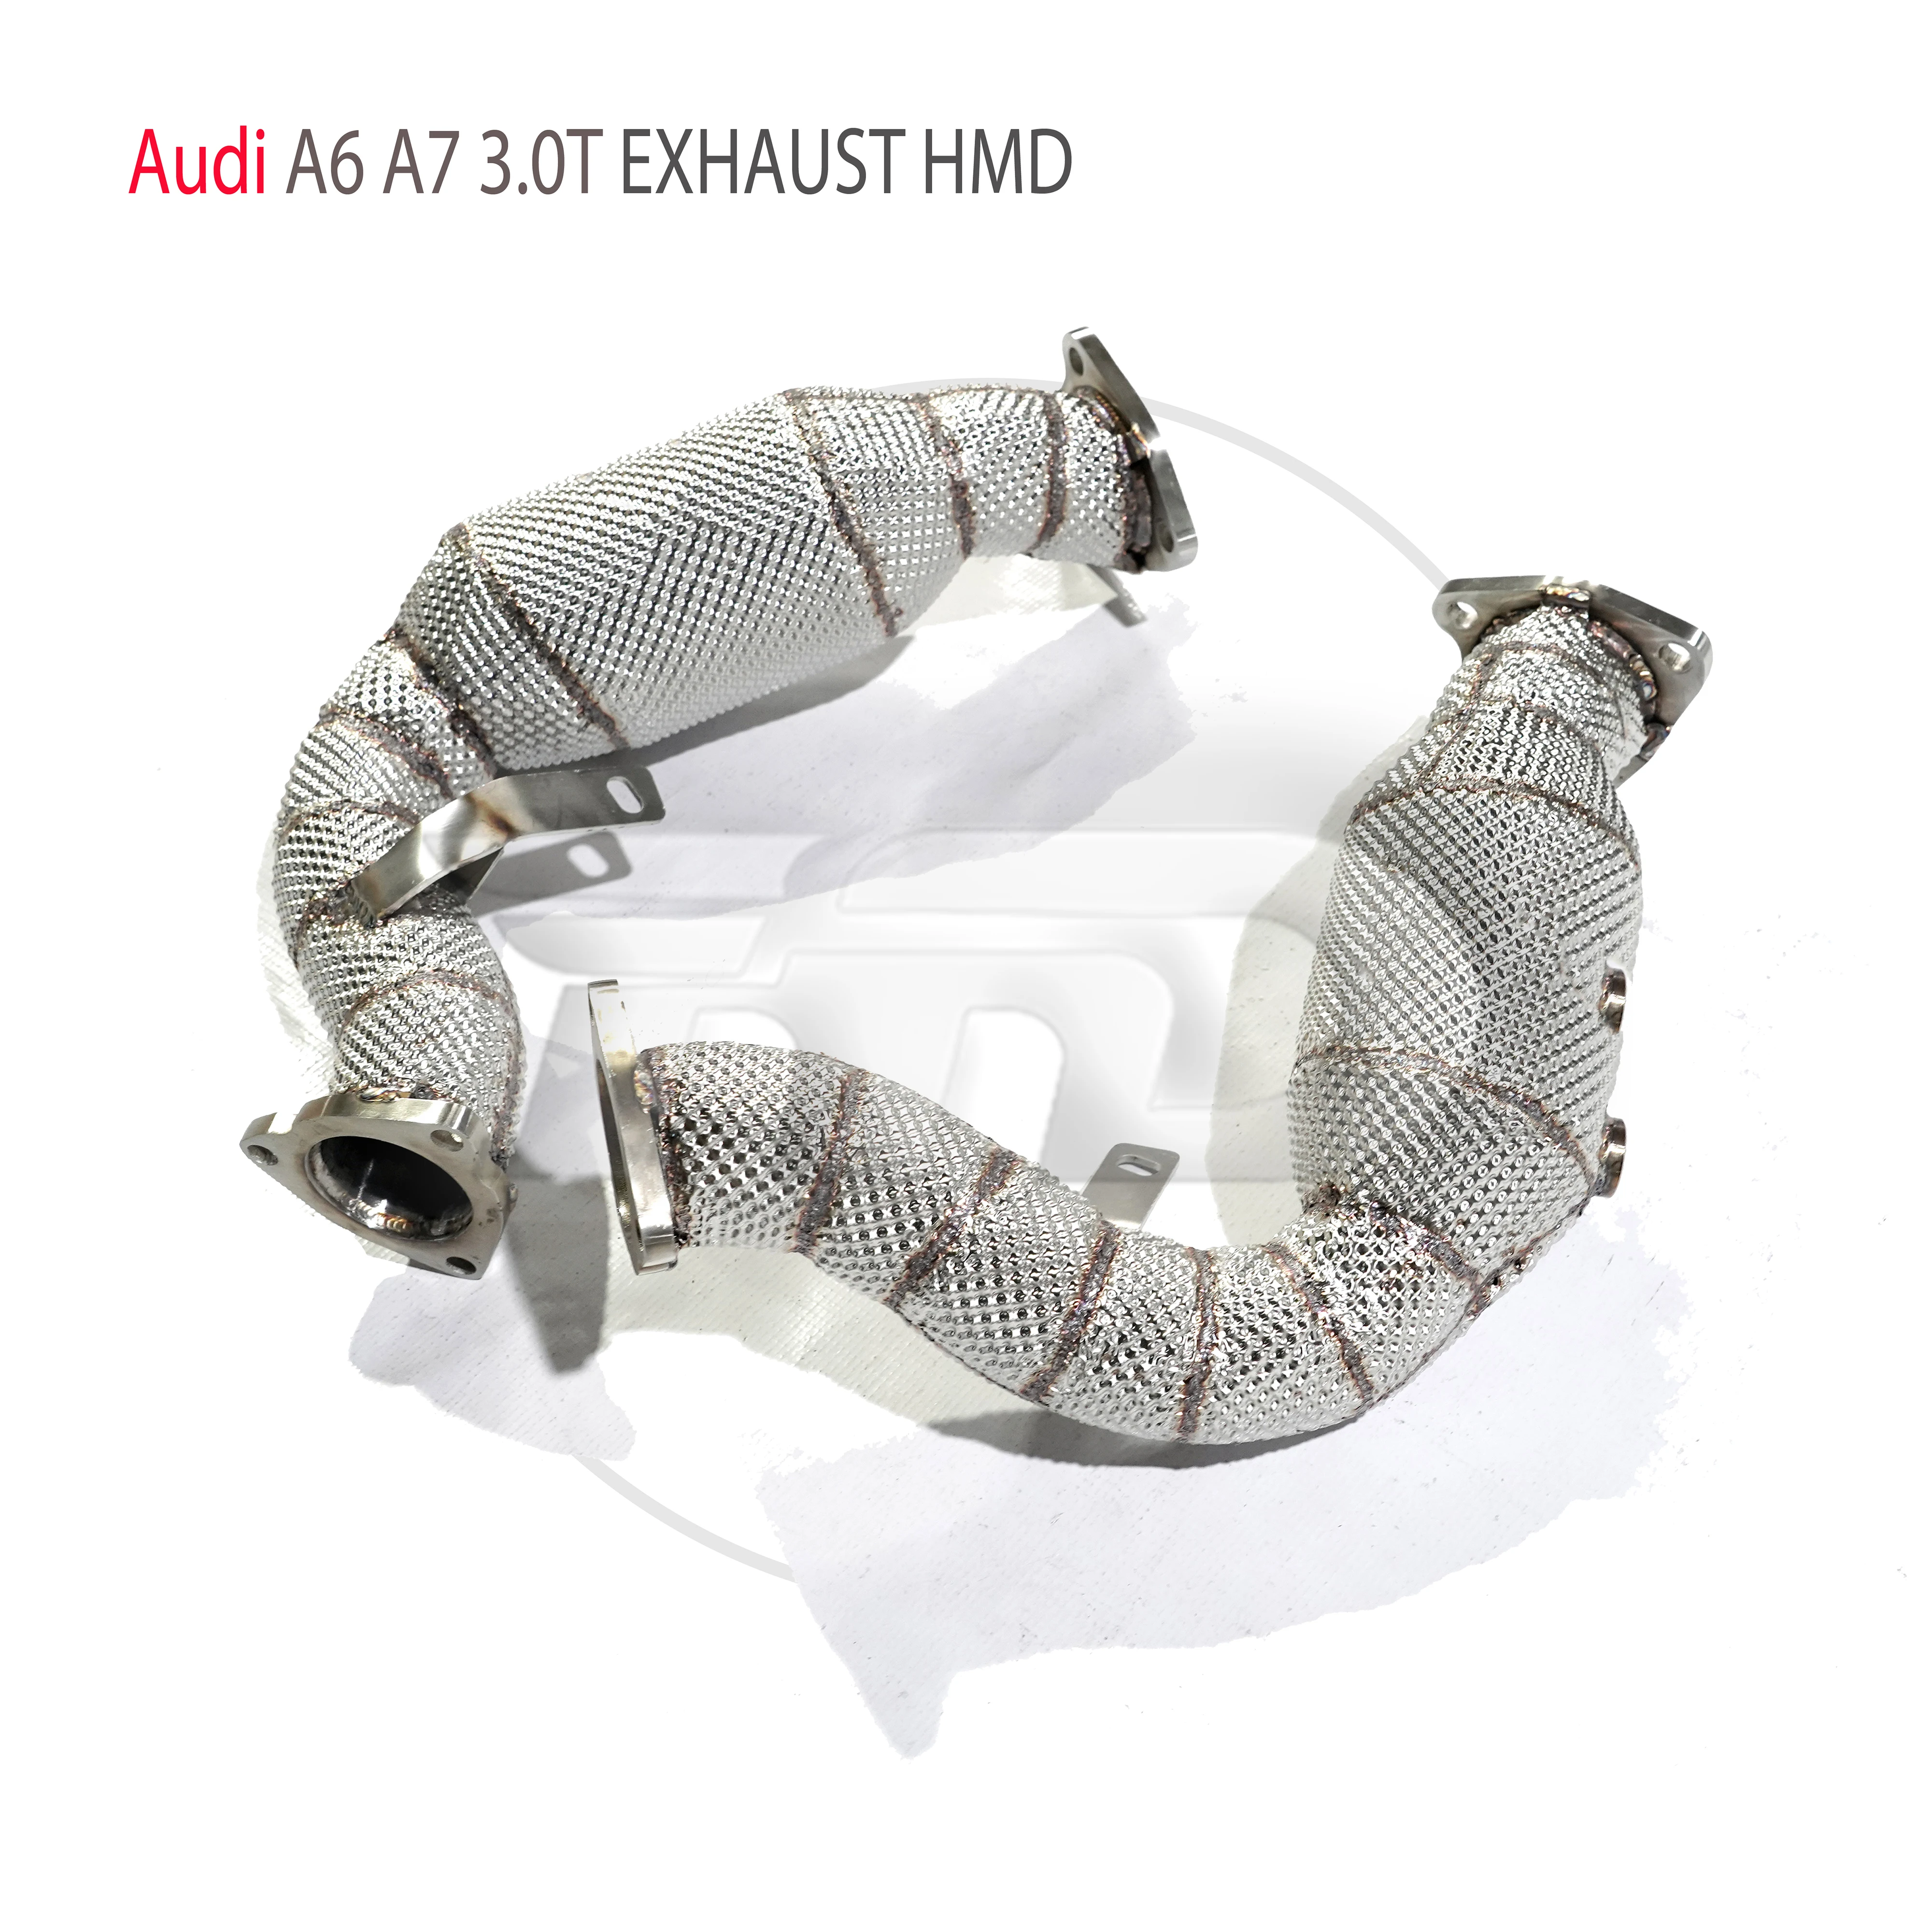 

HMD Exhaust Manifold High Flow Downpipe for Audi A6 A7 C7 3.0T Car Accessories With Catalytic Header Without Cat Catless Pipe